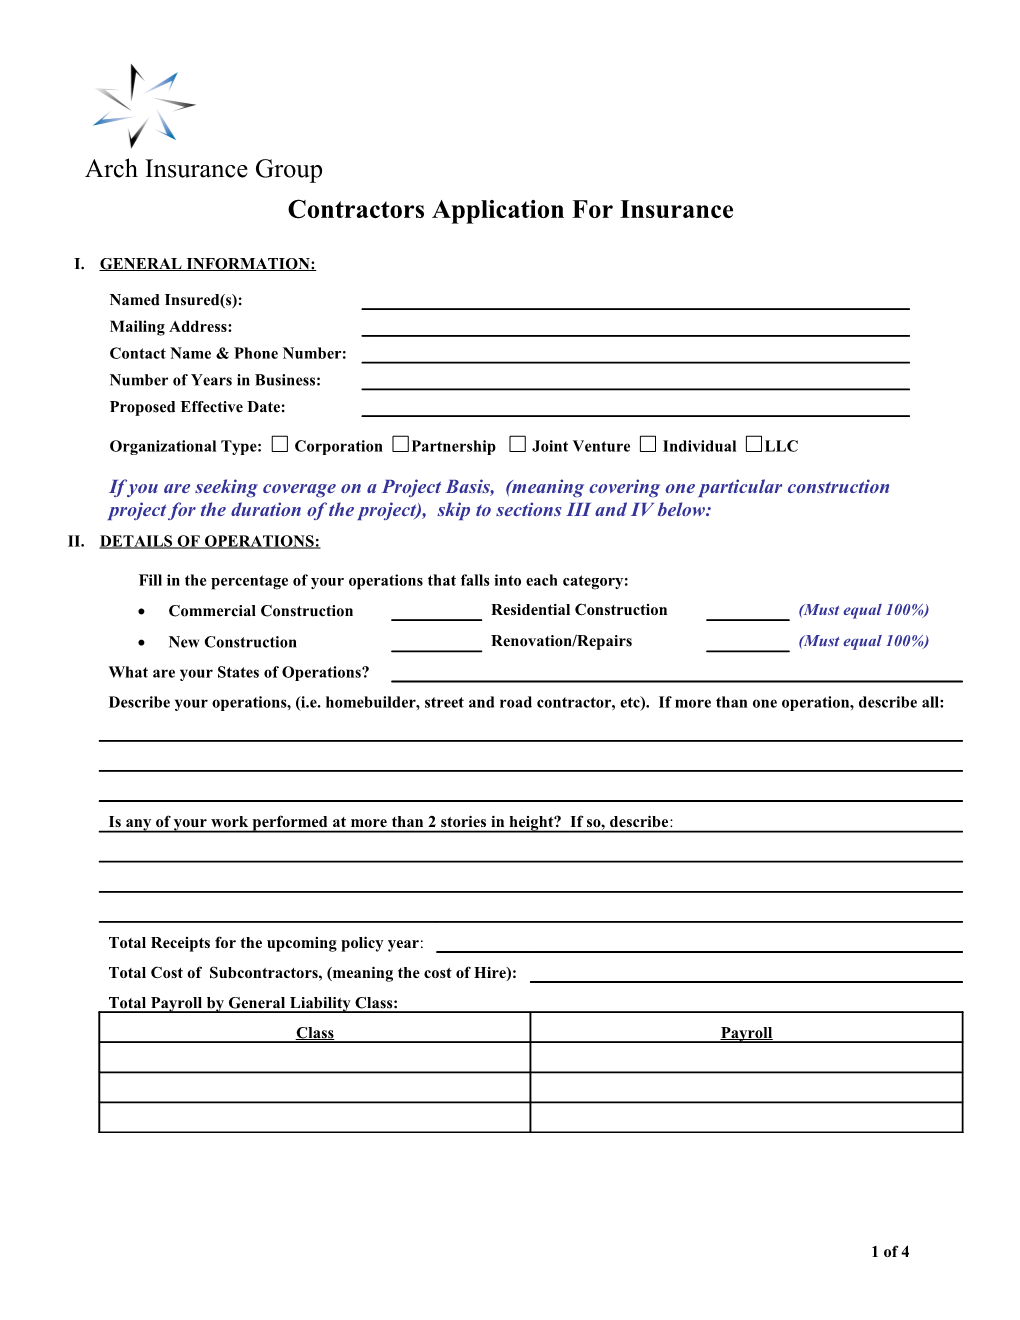 Contractors Application for Insurance